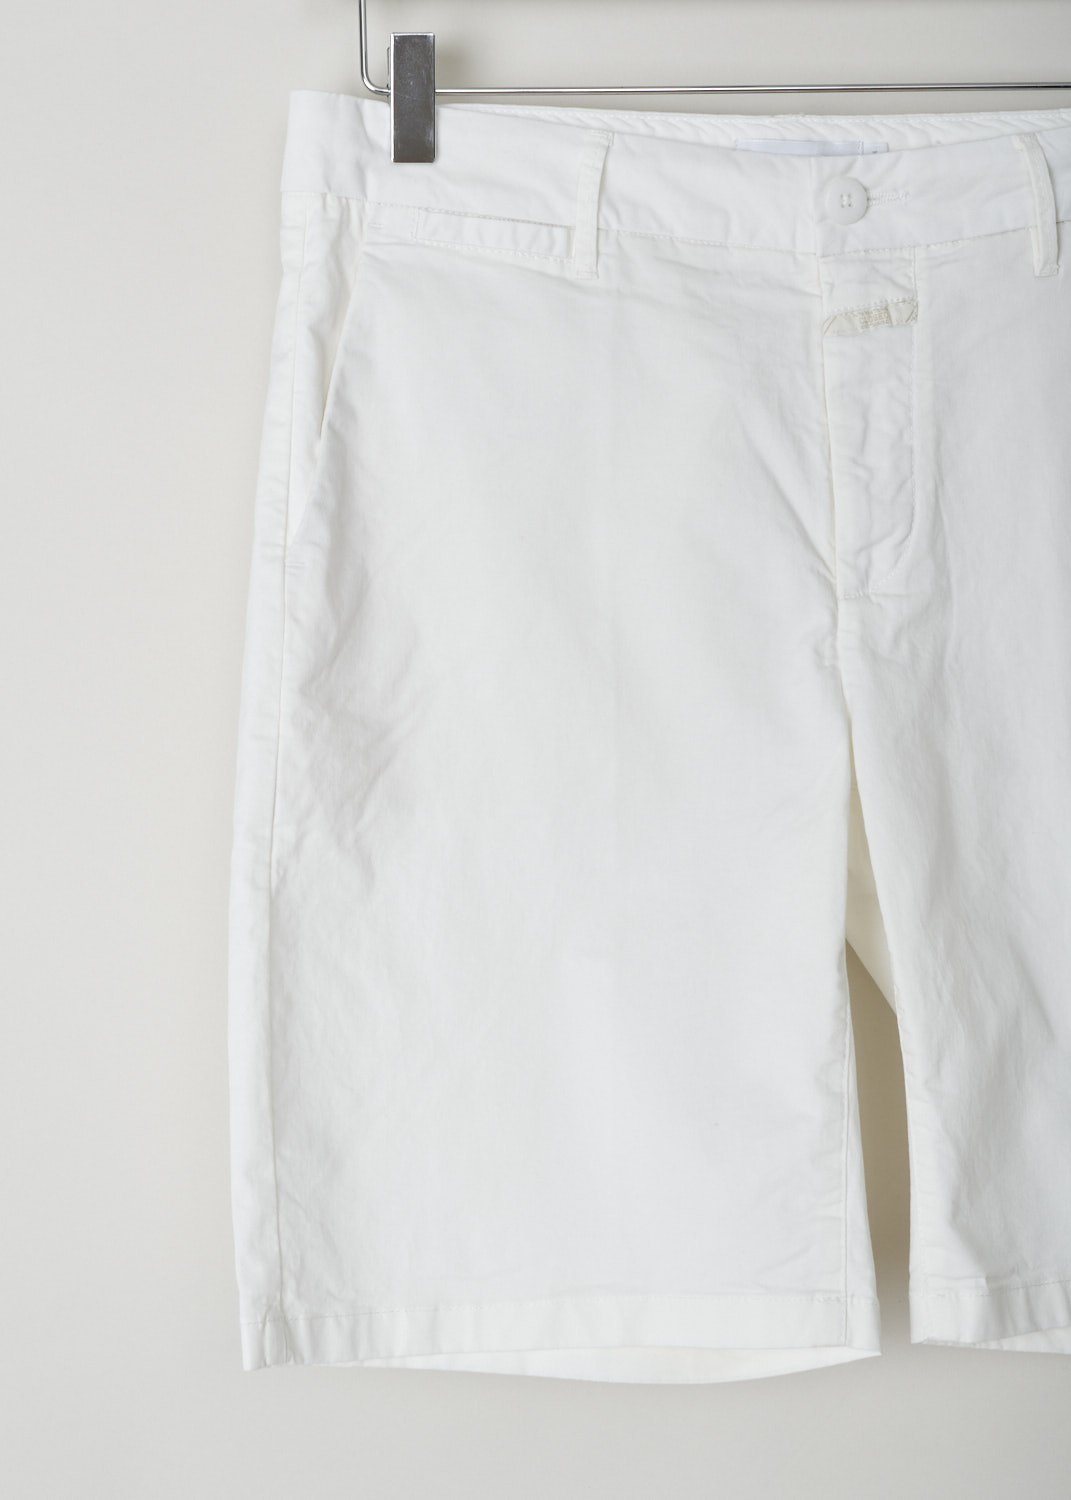 Closed, White shorts, holden_C92244_30D_20_218, white, detail, Brighten up your wardrobe with these white shorts. Made in the chino model, so it has forward slanted pockets on the front and two jetted pockets on the back. The closure option here comes in the form of zipper and a regular button.  